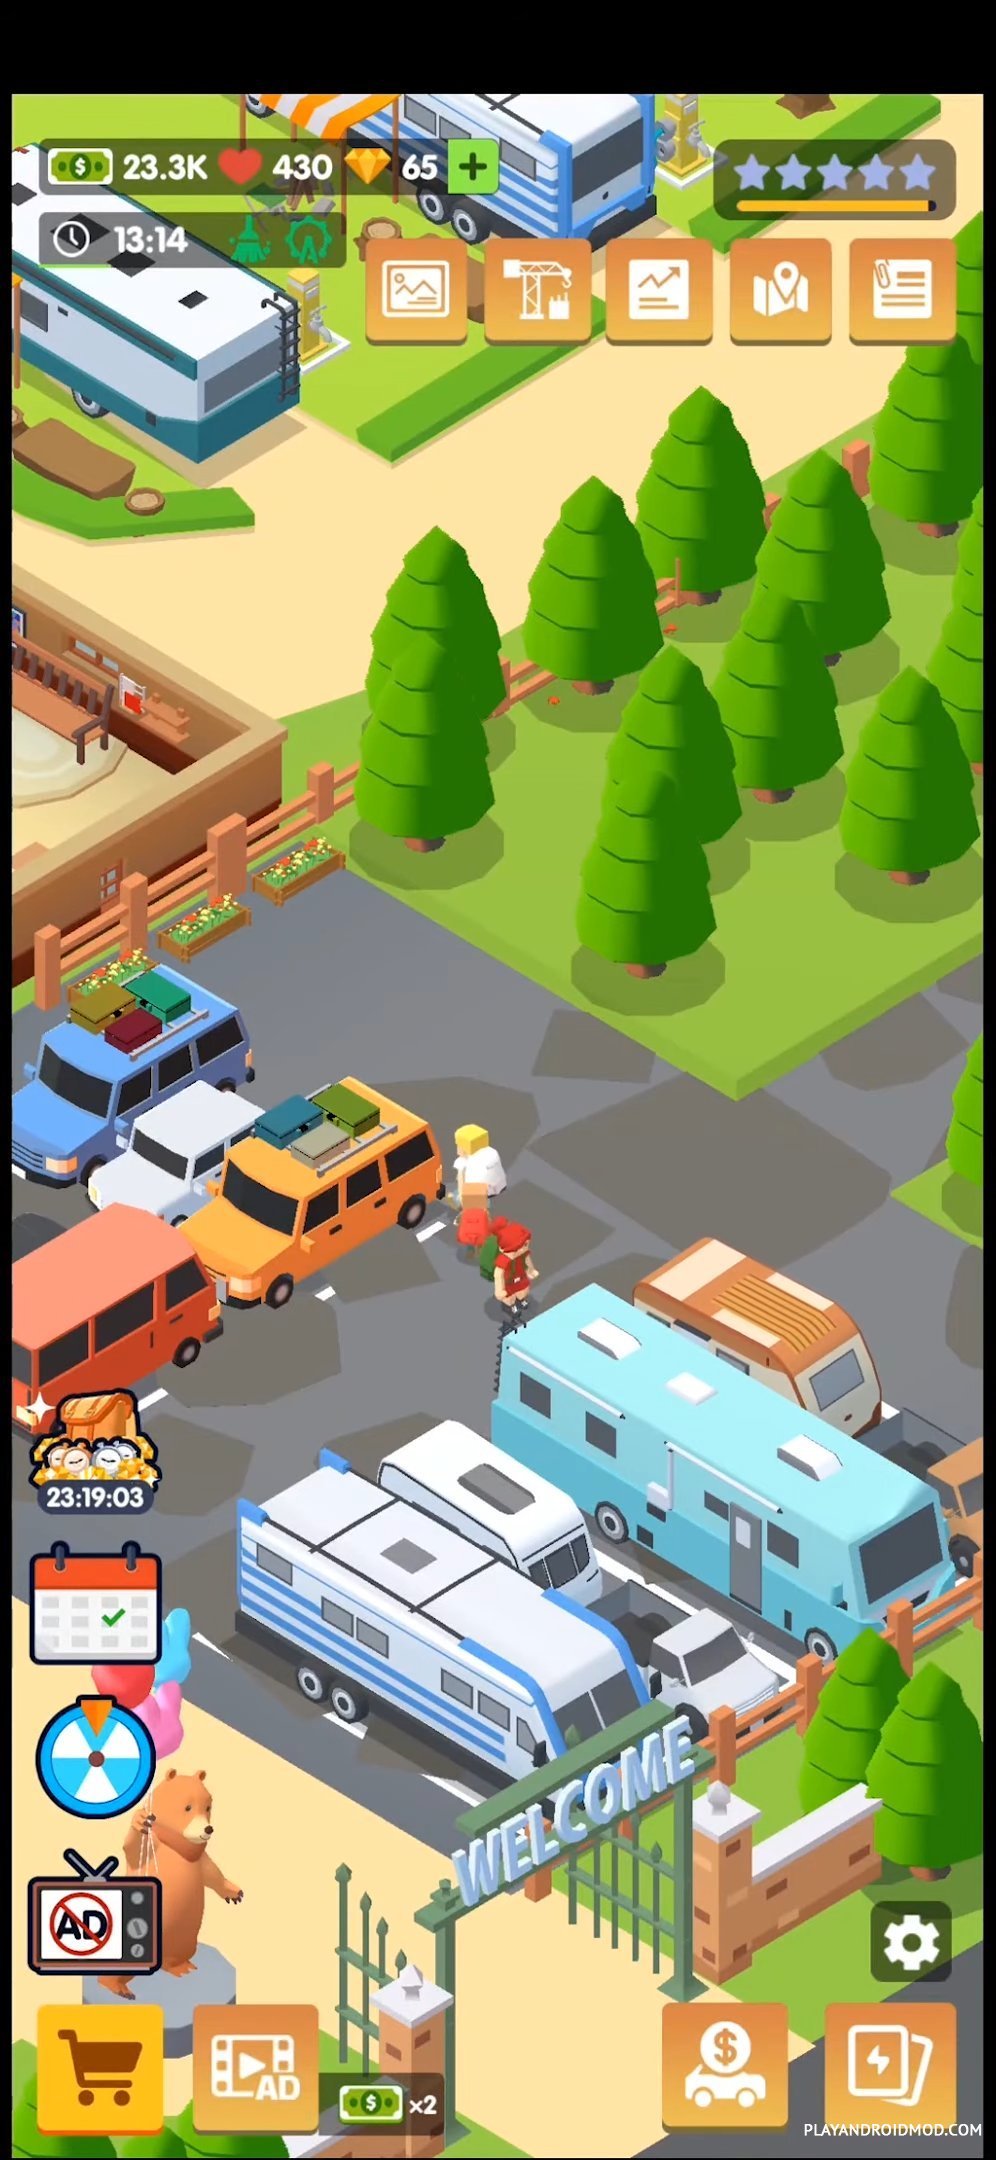 Camping tycoon. Family Town мод много денег и алмазов. БАУМАСТЕР мод много денег и алмазов последняя версия.